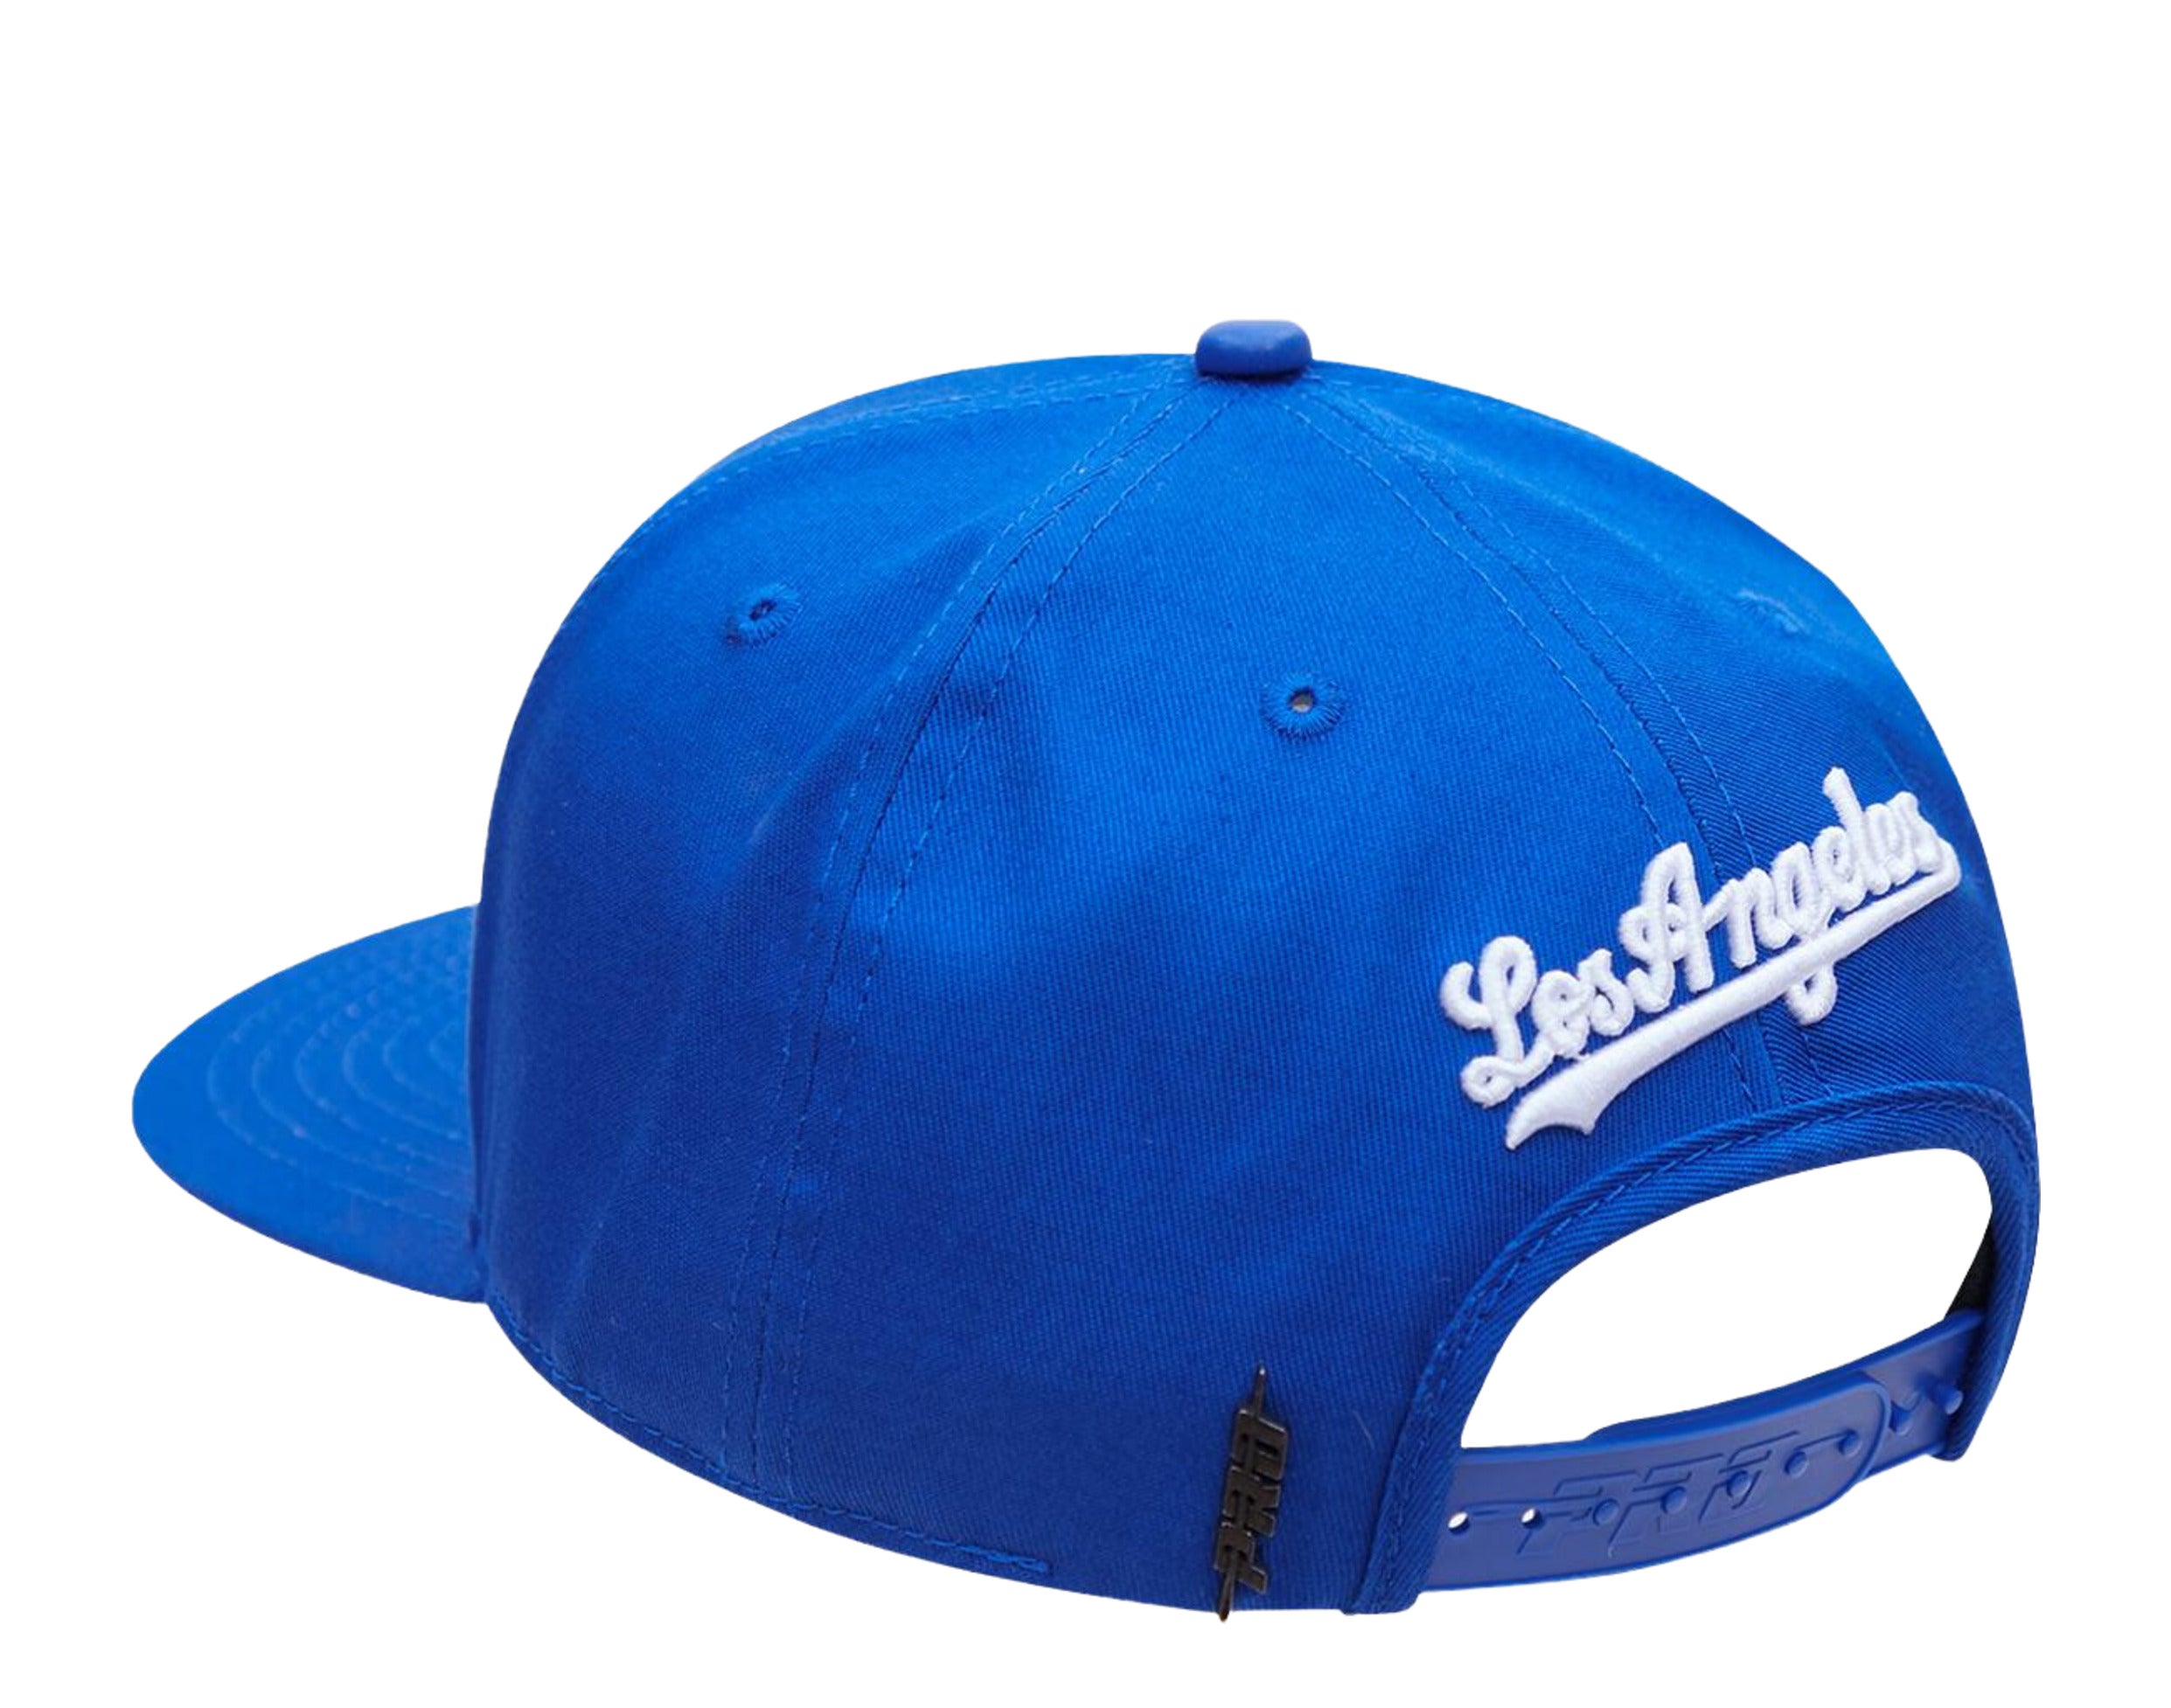 Mitchell and Ness Los Angeles Dodgers 1988 World Series